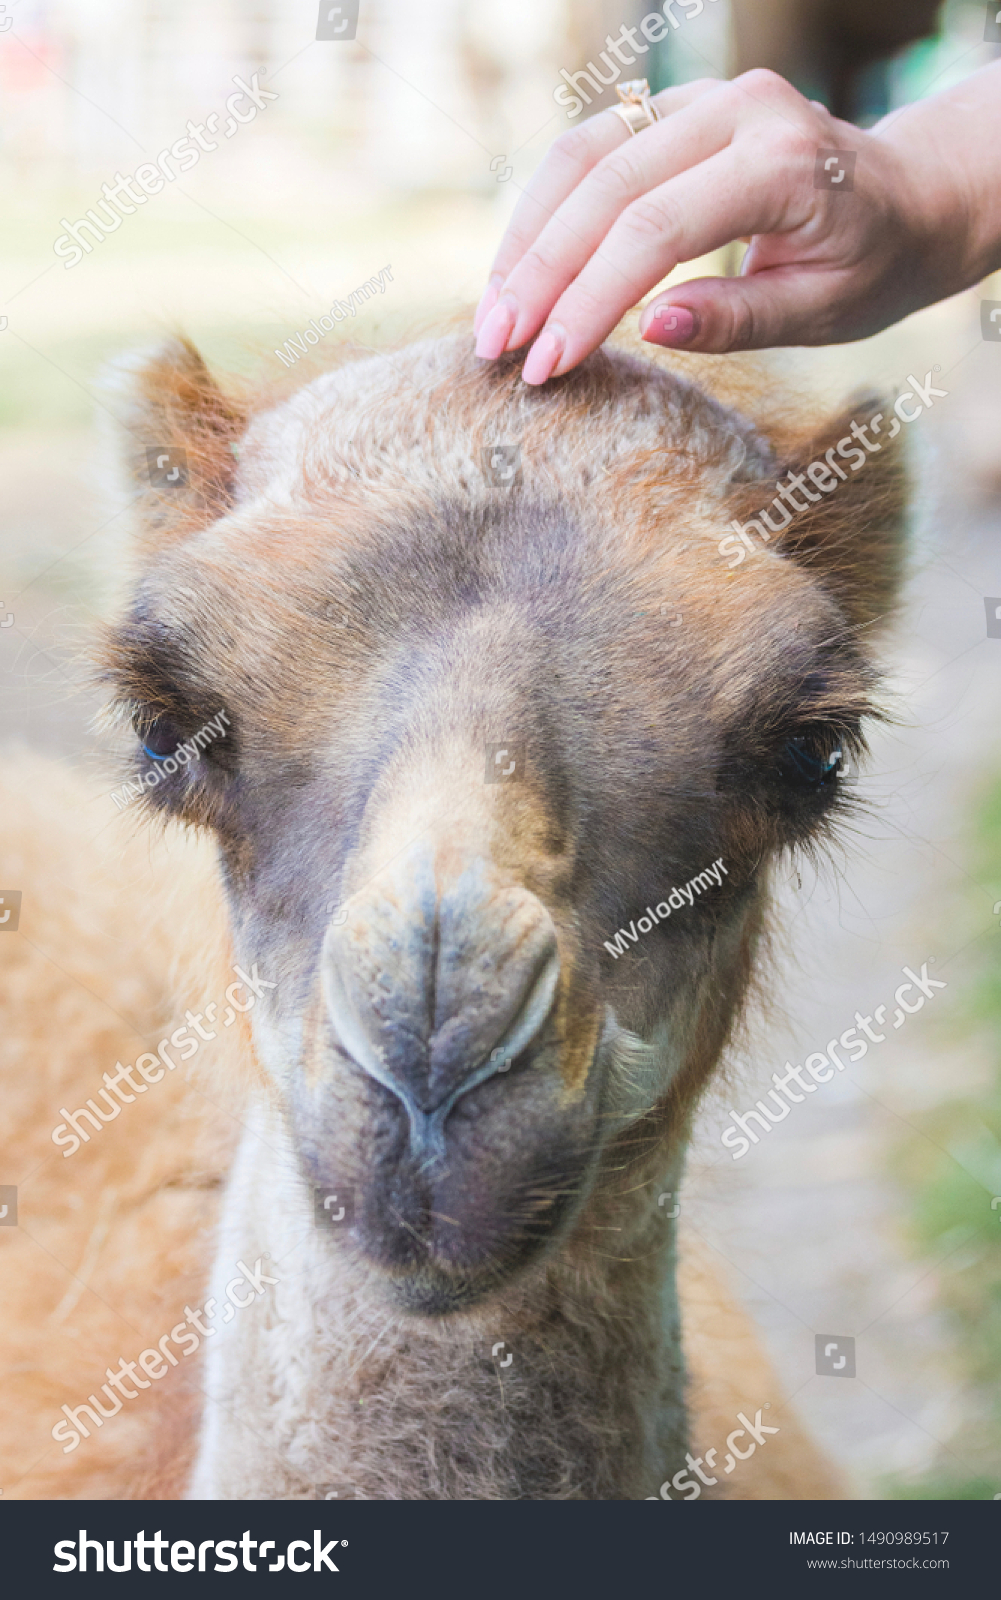 Woman stroking the camel's head with her hand #1490989517